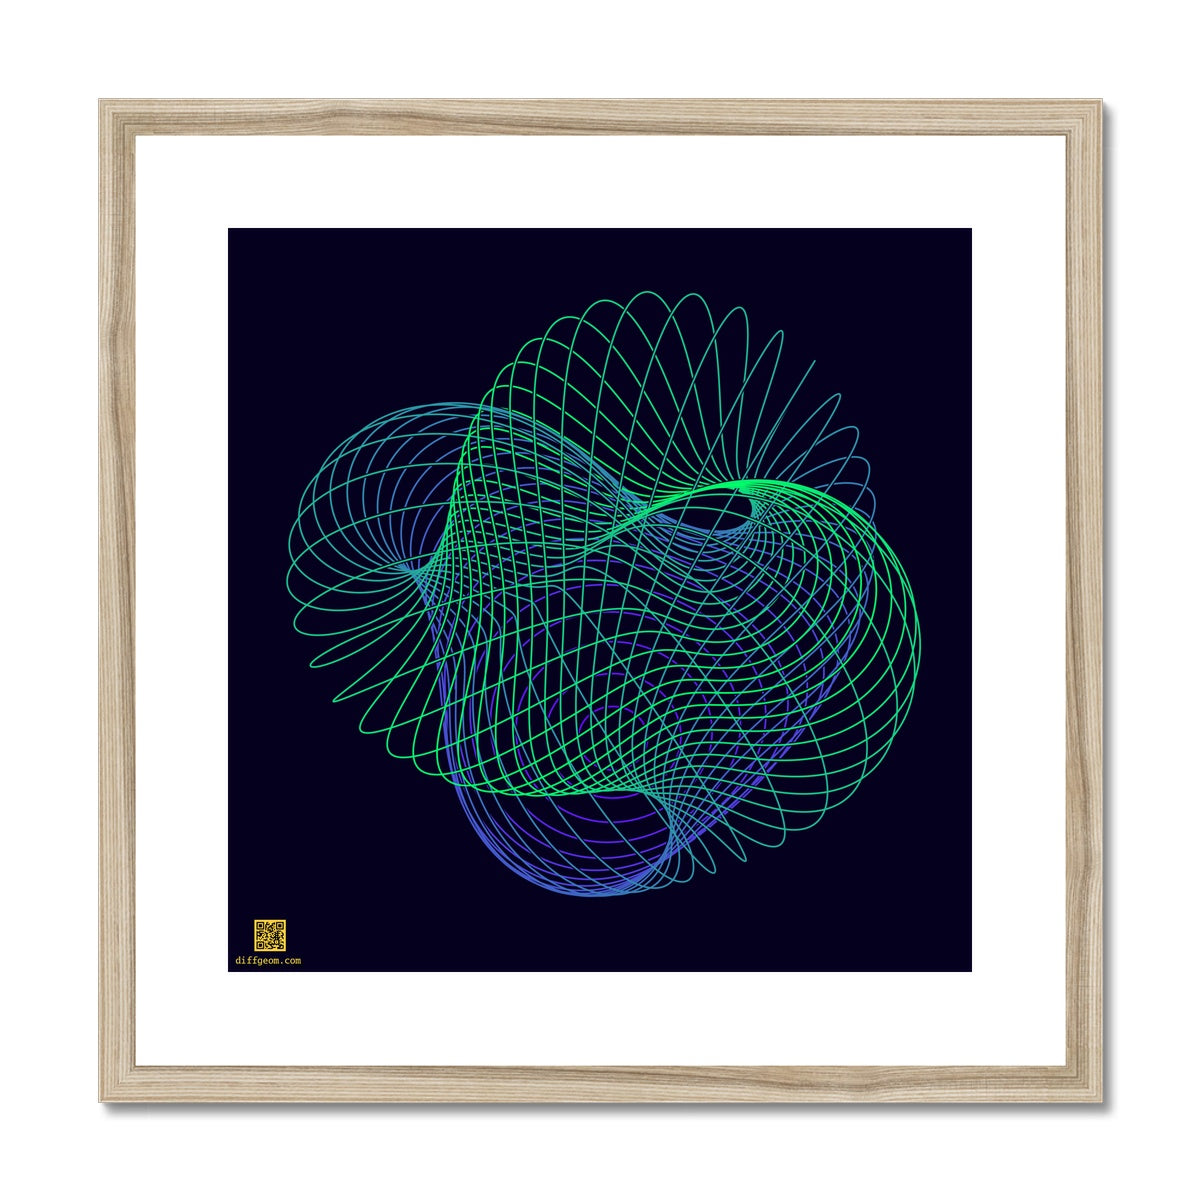 Projective Plane, Spring Framed & Mounted Print